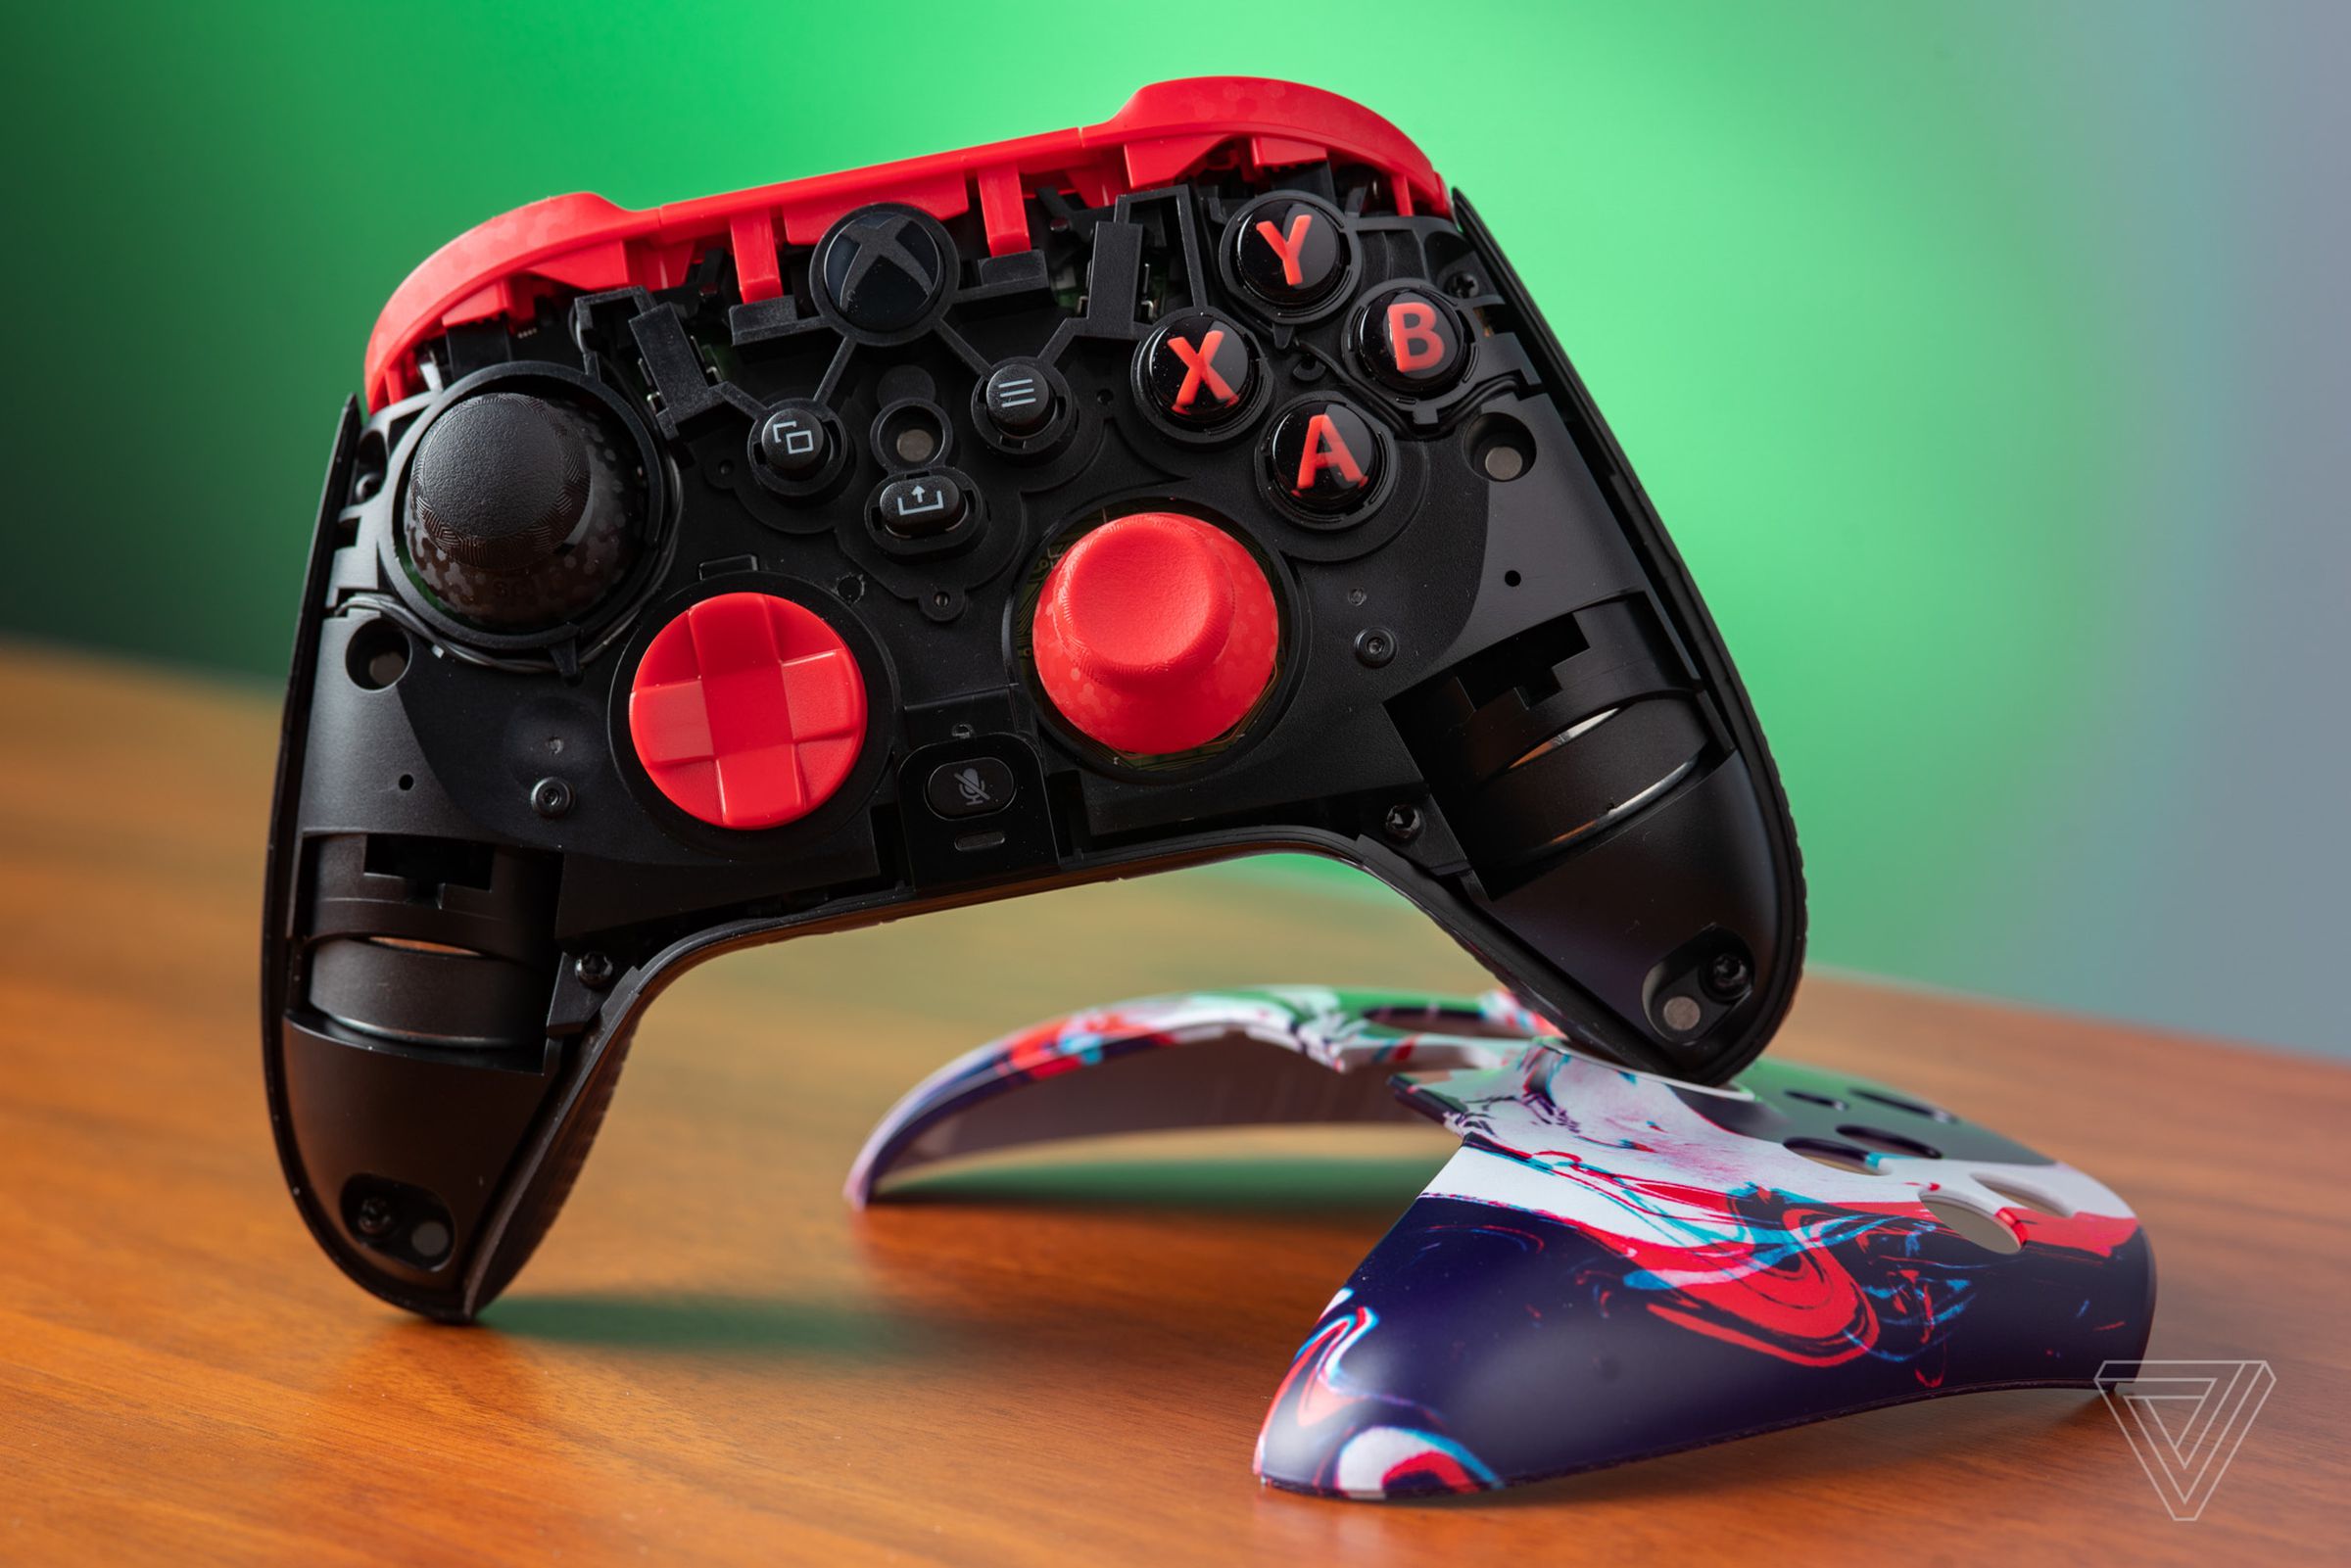 The Scuf Instinct Pro Xbox controller resting on its detached magnetic faceplate.